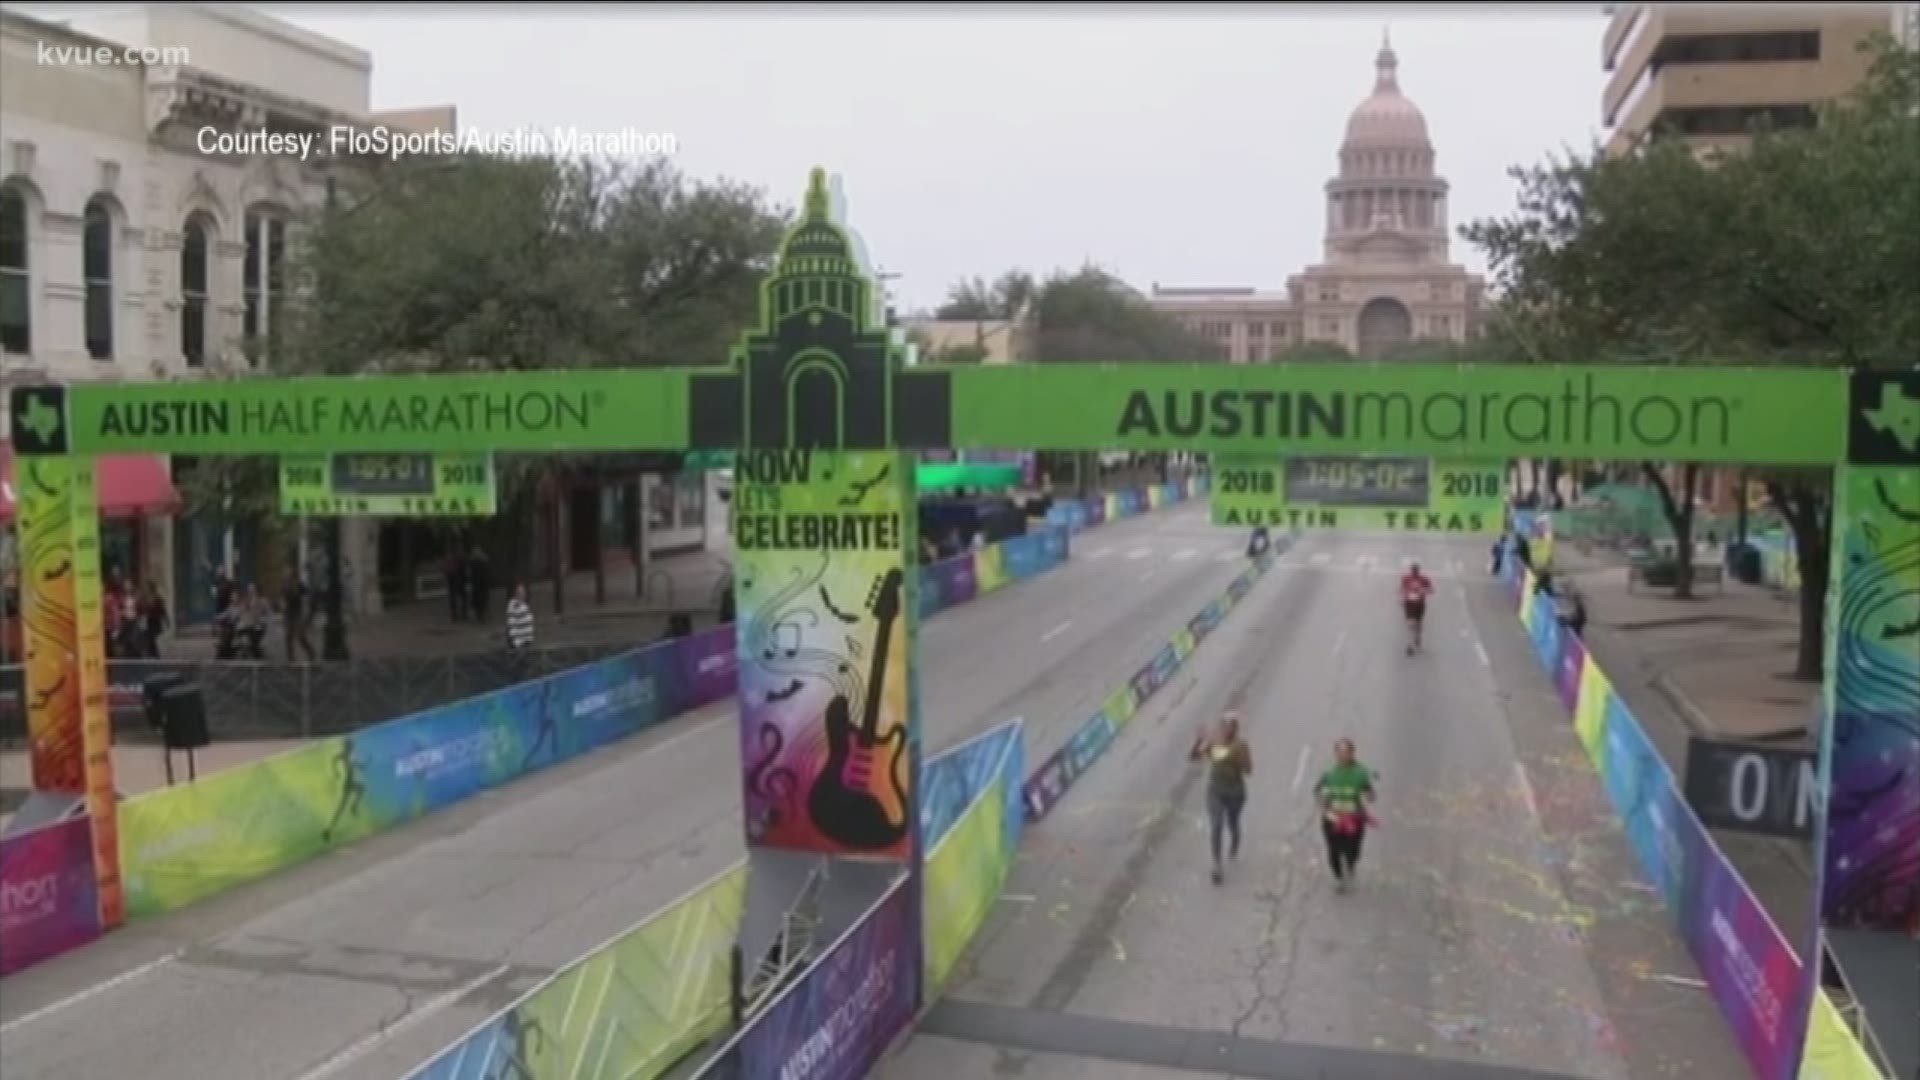 More than 15,000 runners will hit the pavement in Austin this weekend for the annual Austin Marathon.